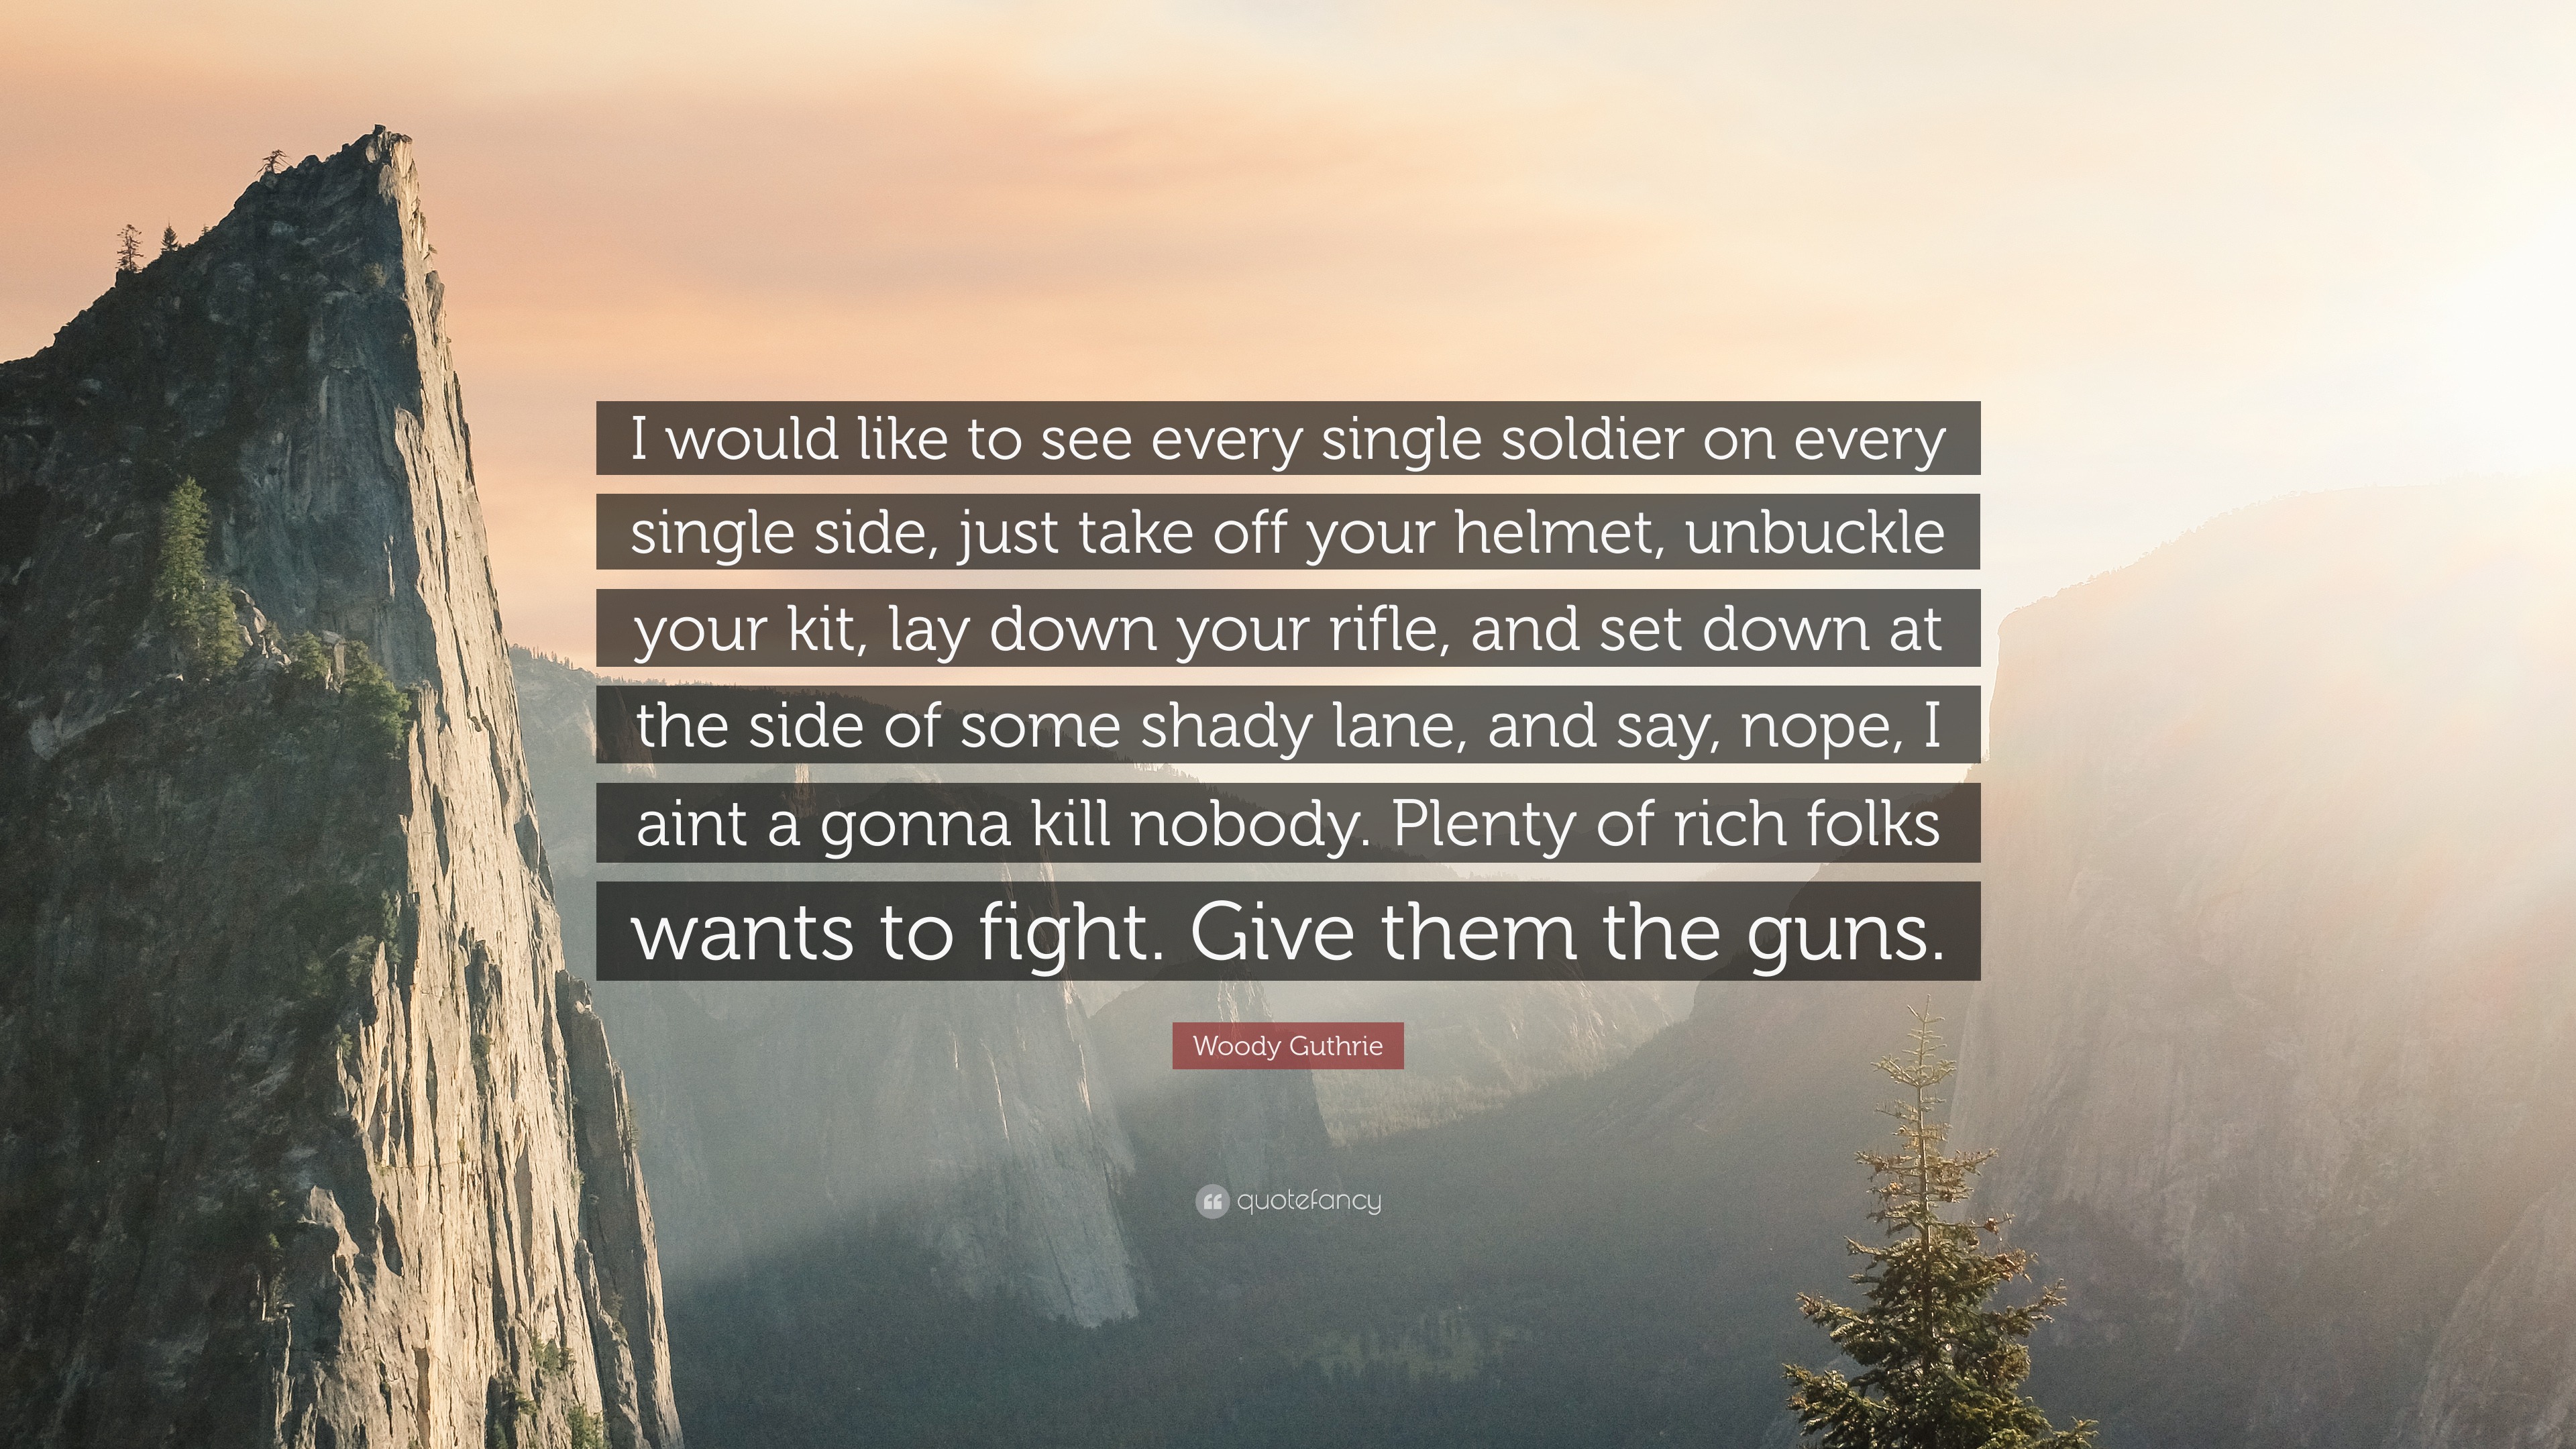 https://quotefancy.com/media/wallpaper/3840x2160/4855779-Woody-Guthrie-Quote-I-would-like-to-see-every-single-soldier-on.jpg